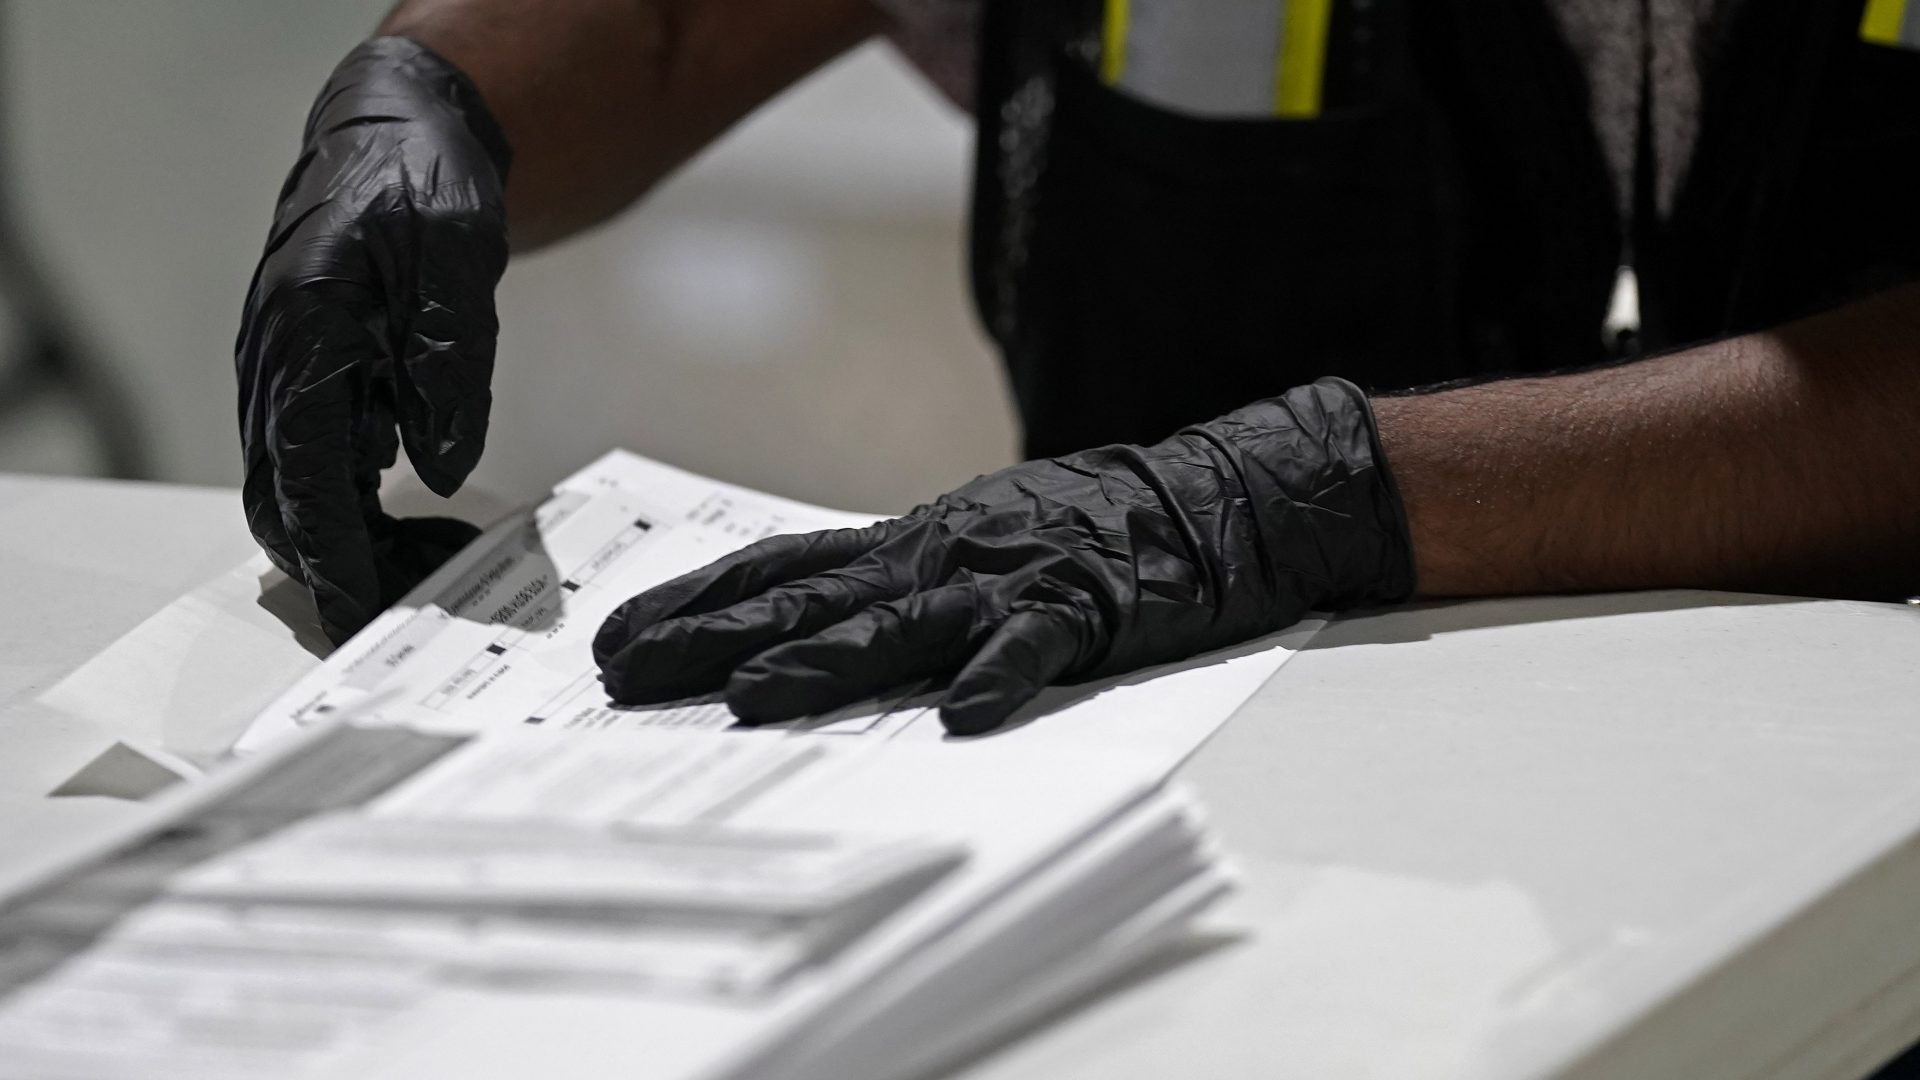 A workers prepares absentee ballots for mailing at the Wake County Board of Elections in Raleigh, N.C., Thursday, Sept. 3, 2020.